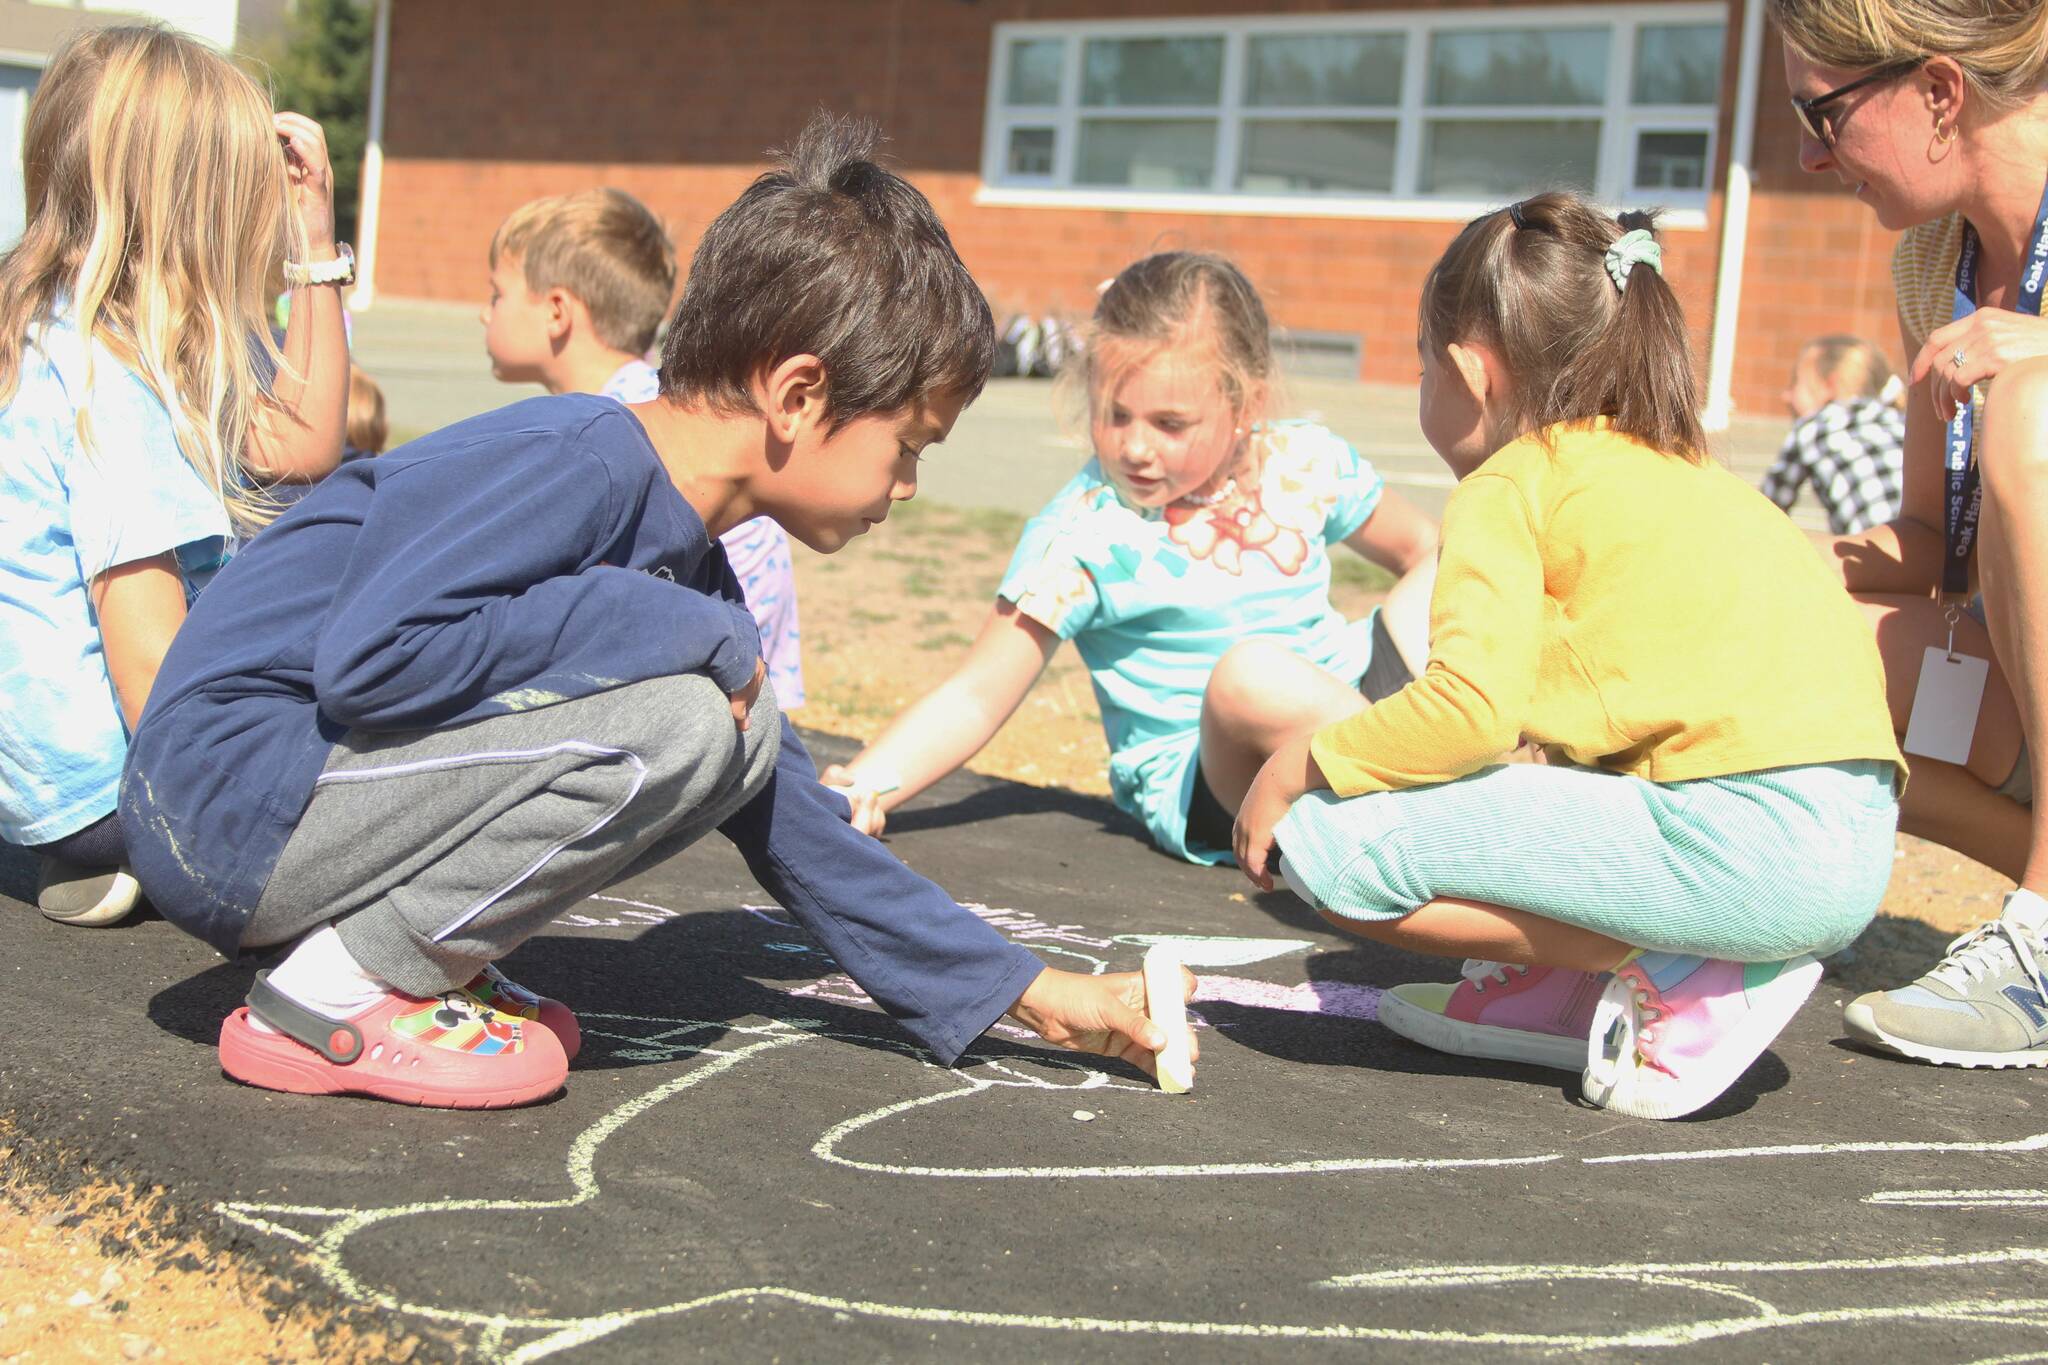 Photo by Karina Andrew/Whidbey News-Times
First grader Ian Kerner helps “chalk the walk” Sept. 15 at Hillcrest Elementary School.